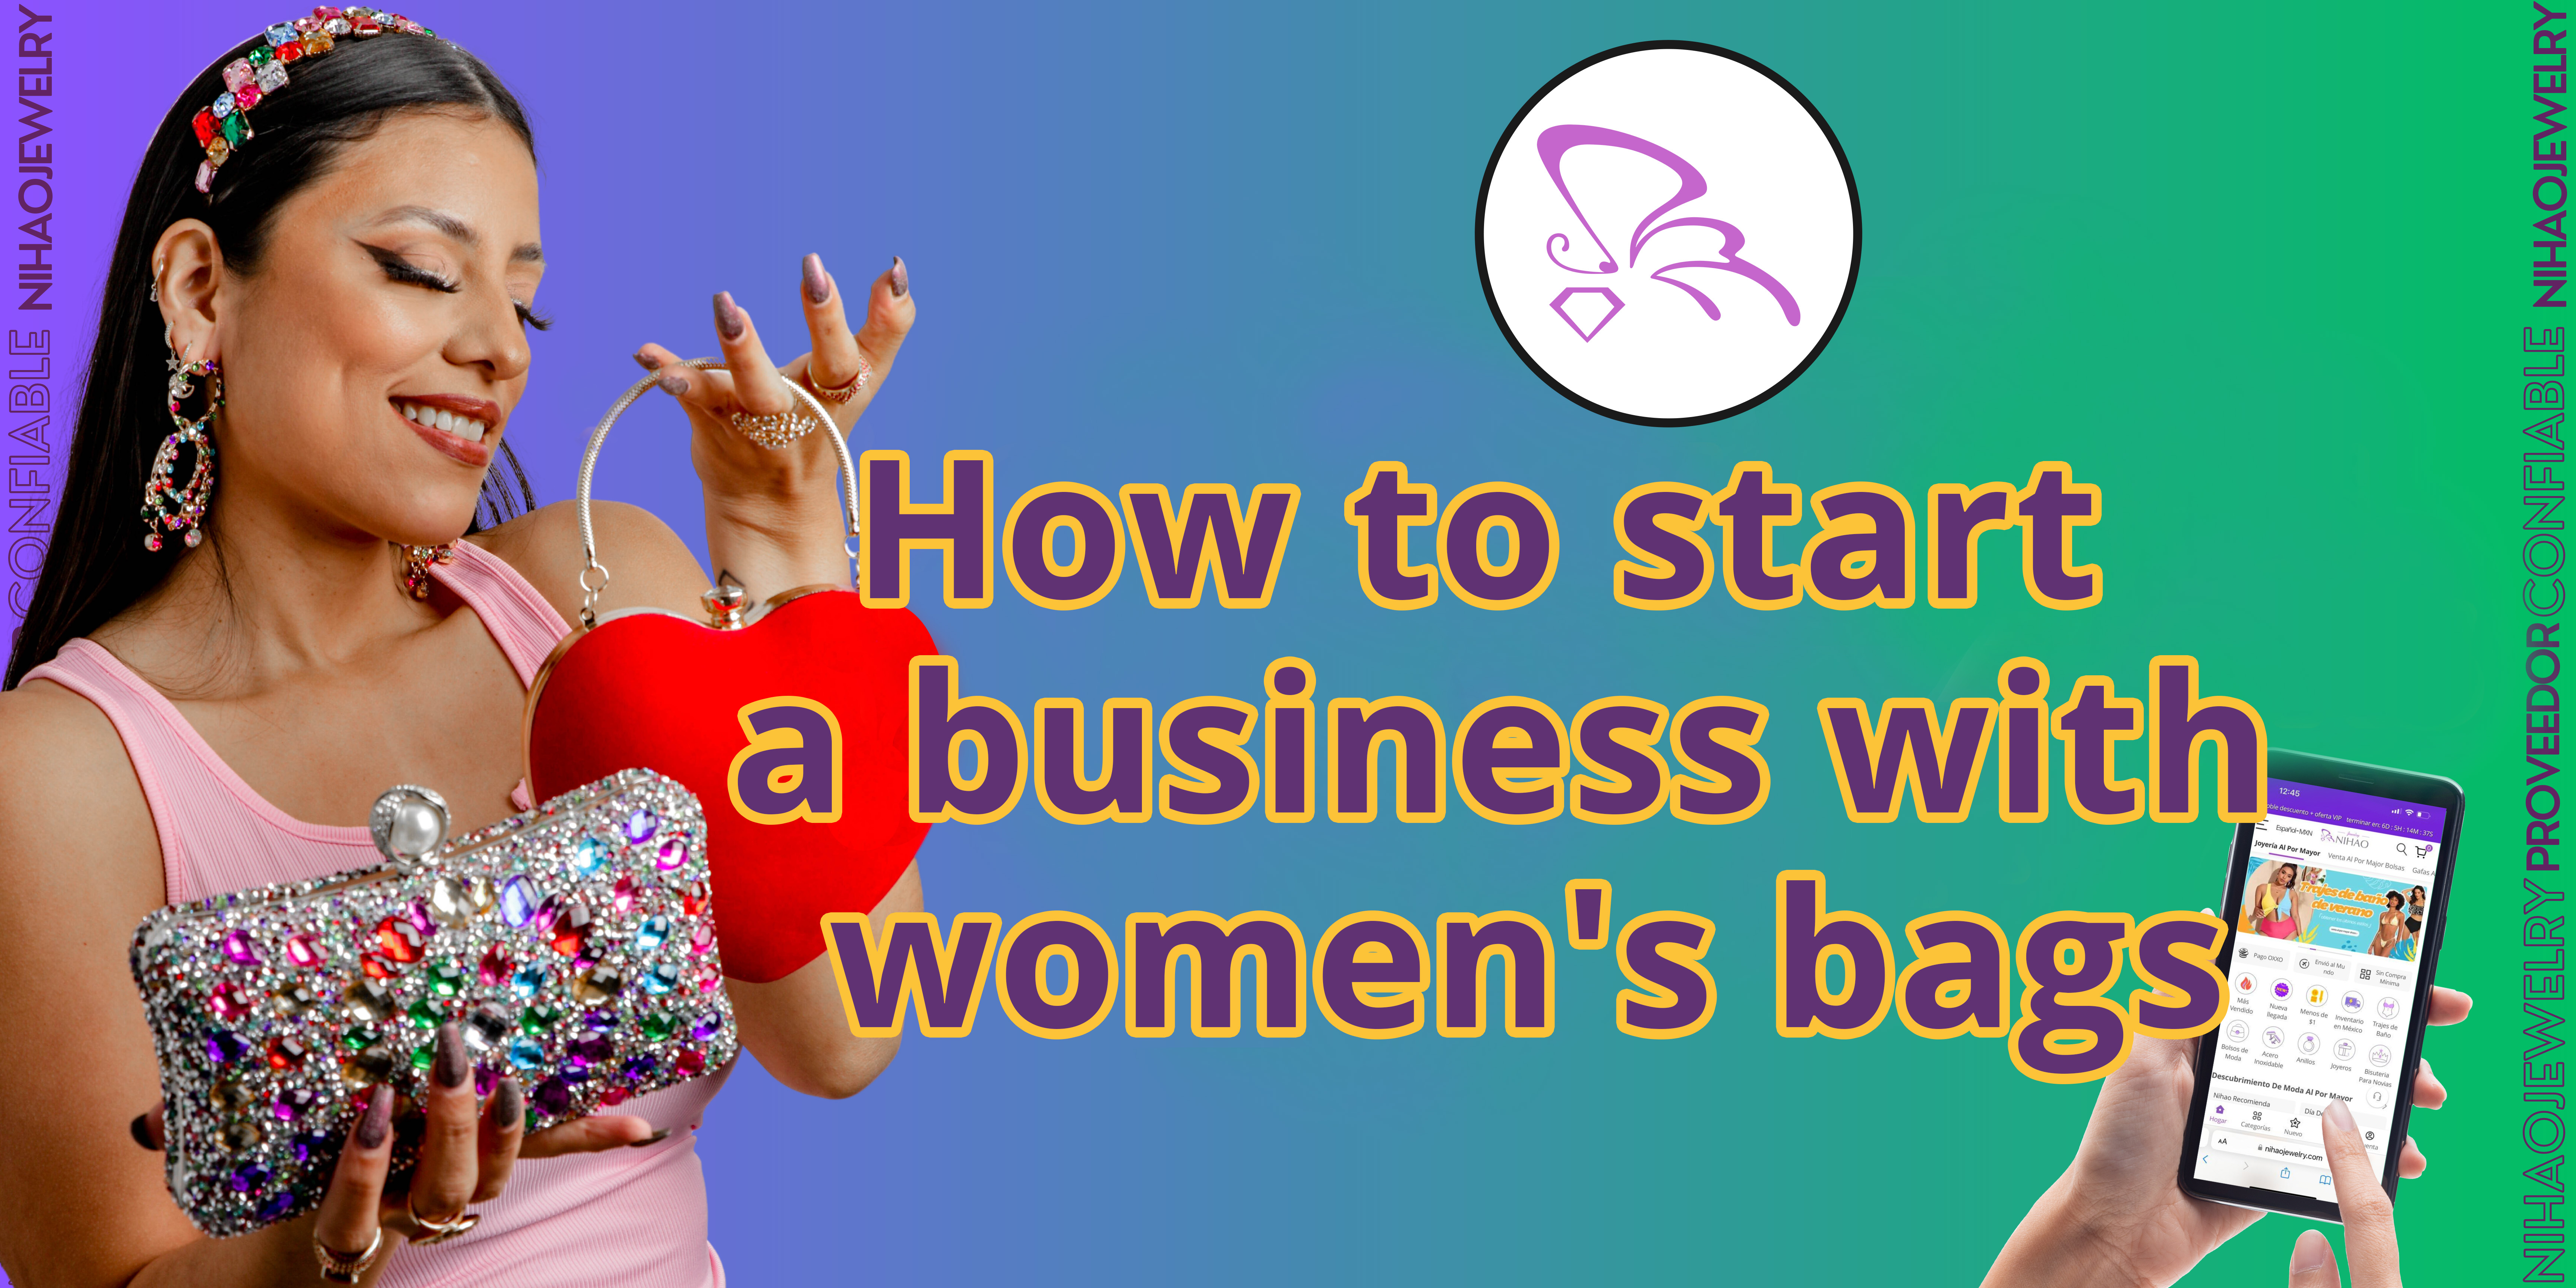 How to start a business with women's bags